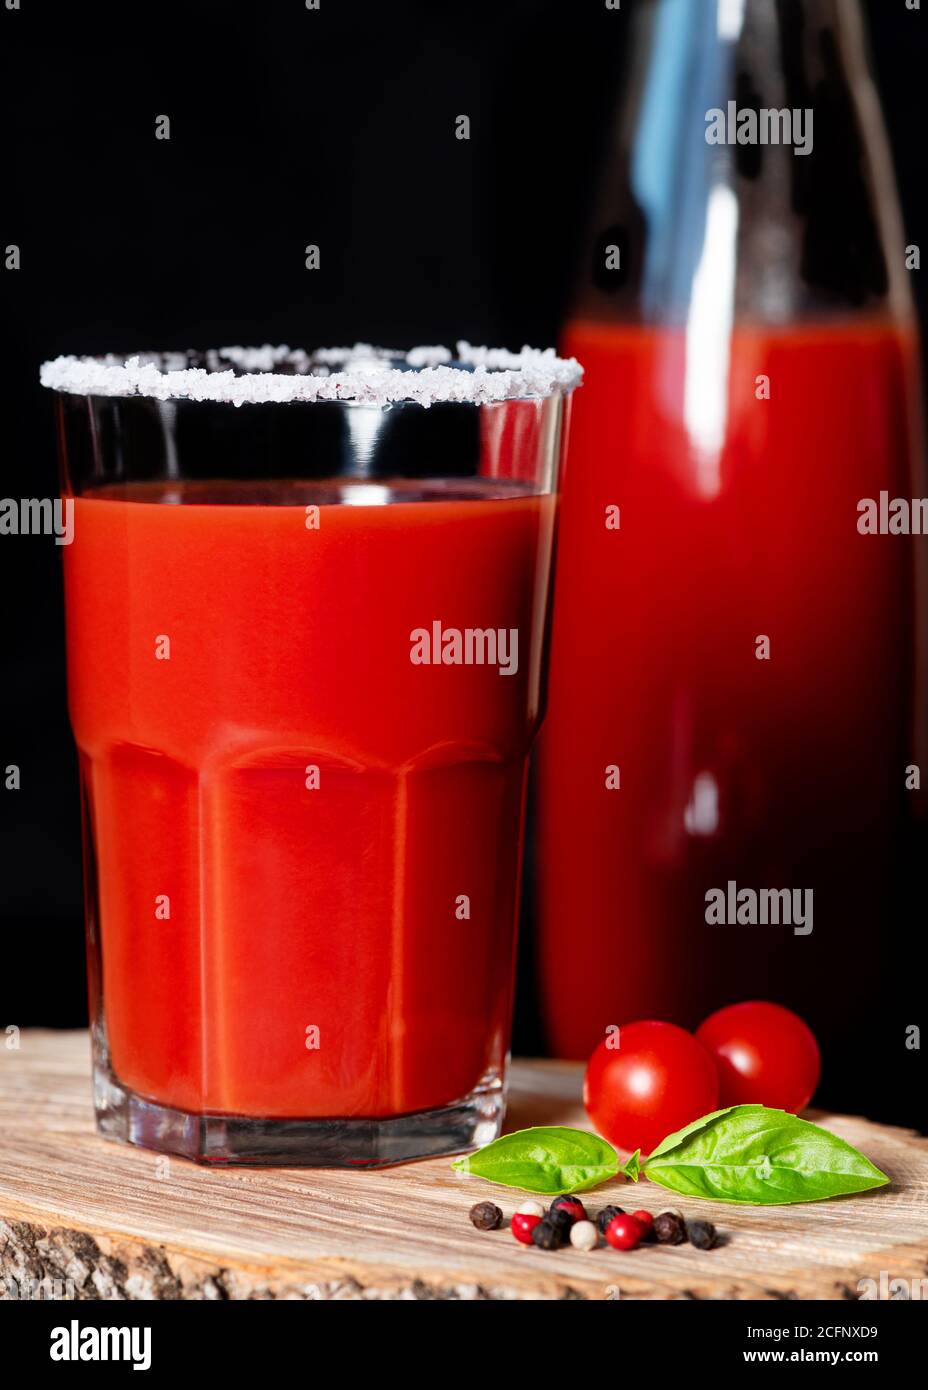 Tomato juice in glass with salty rim on wooden background. Closeup. Low key. Vertical orientation Stock Photo